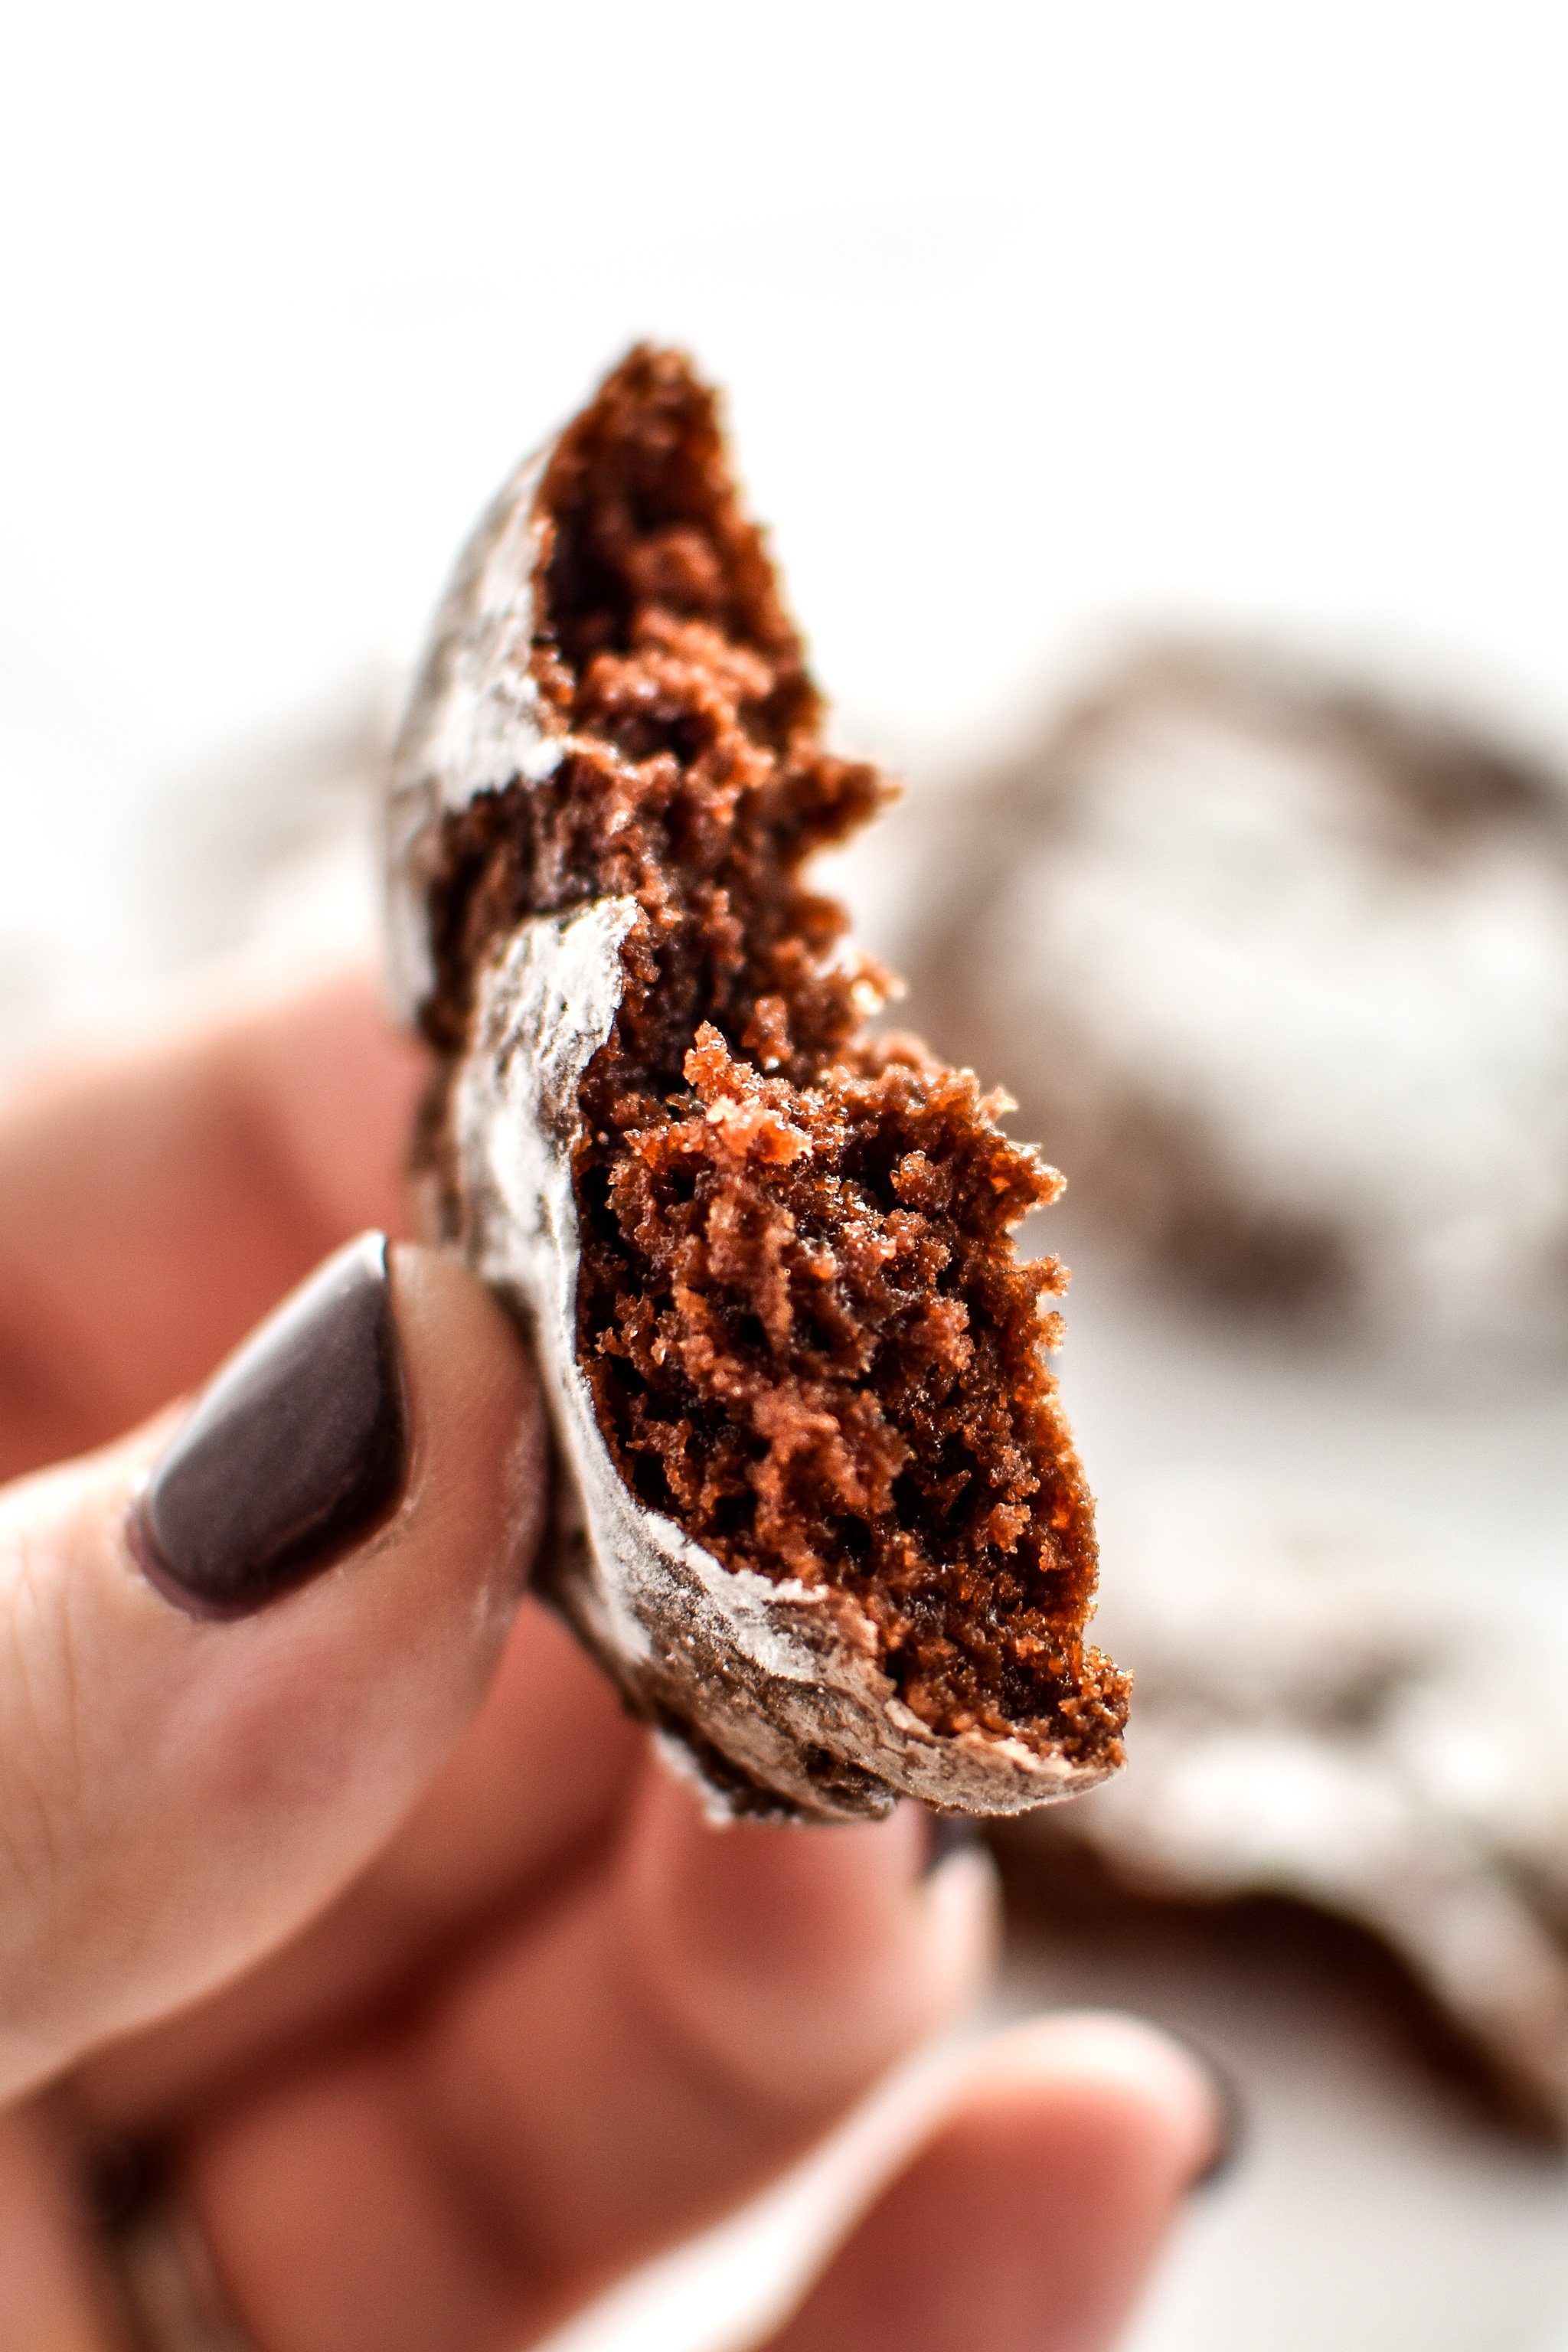 Holding a classic chewy chocolate crinkle cookie.